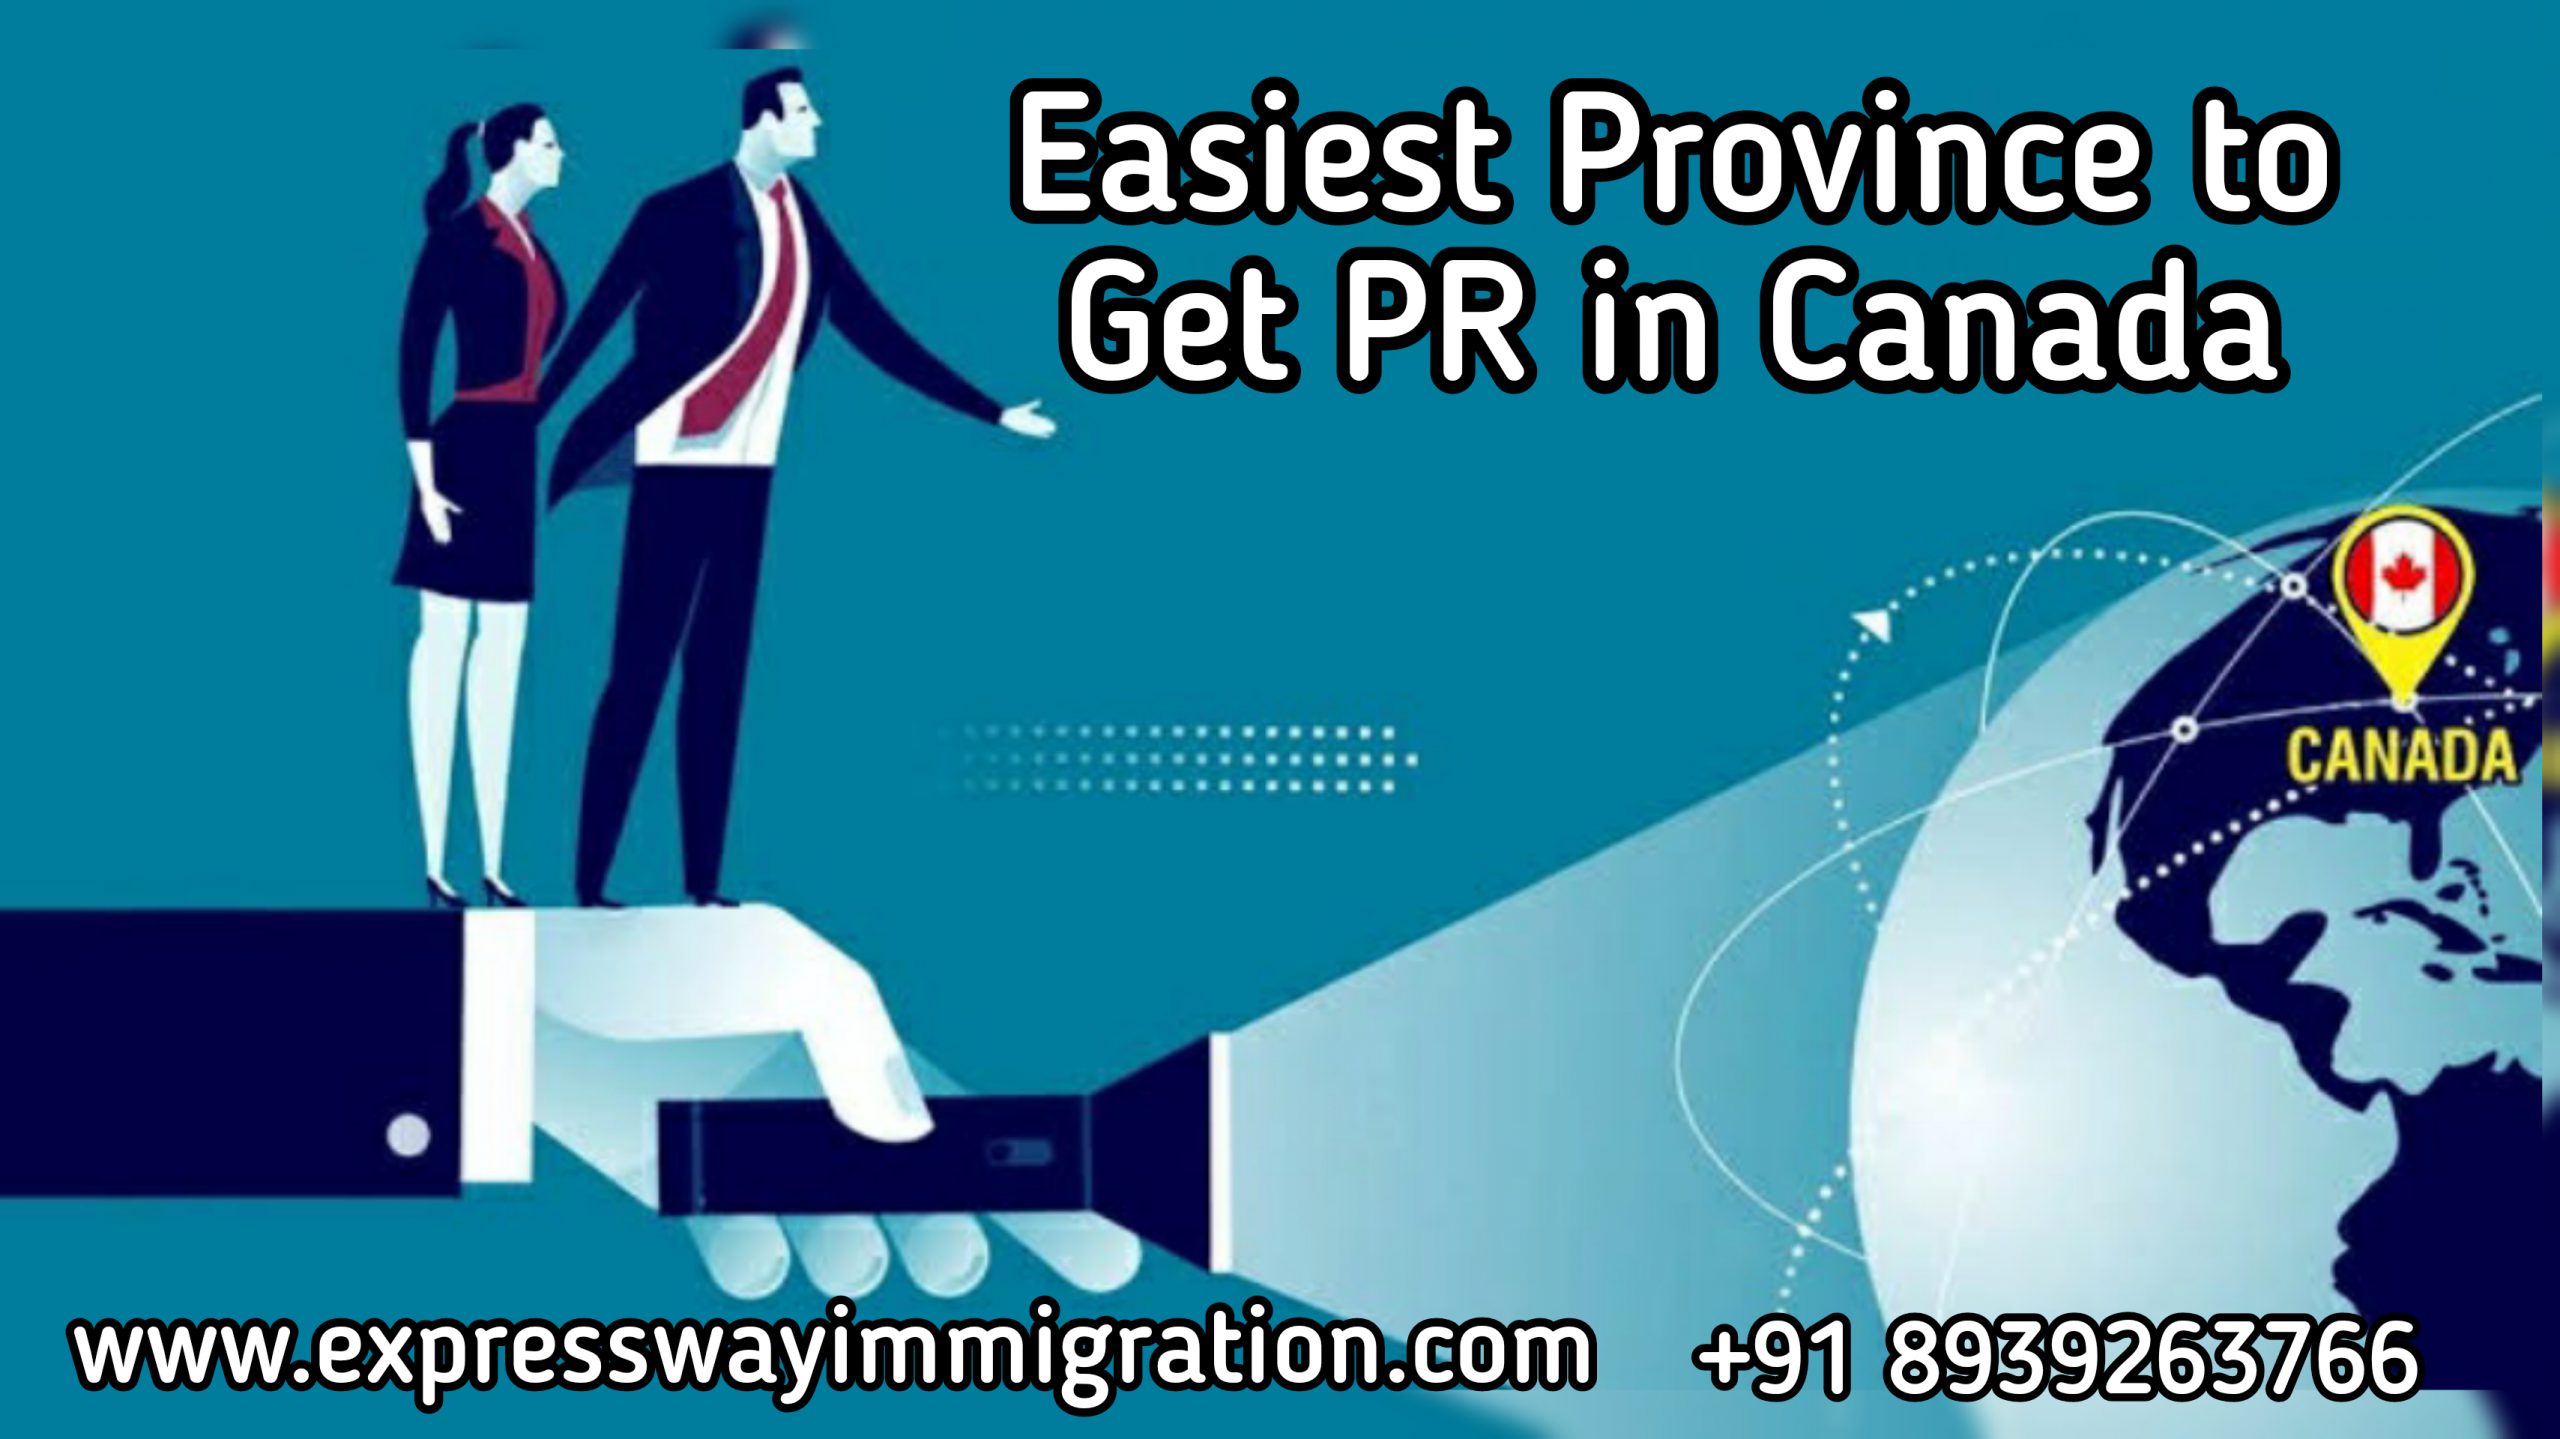 Easiest province to get PR in Canada